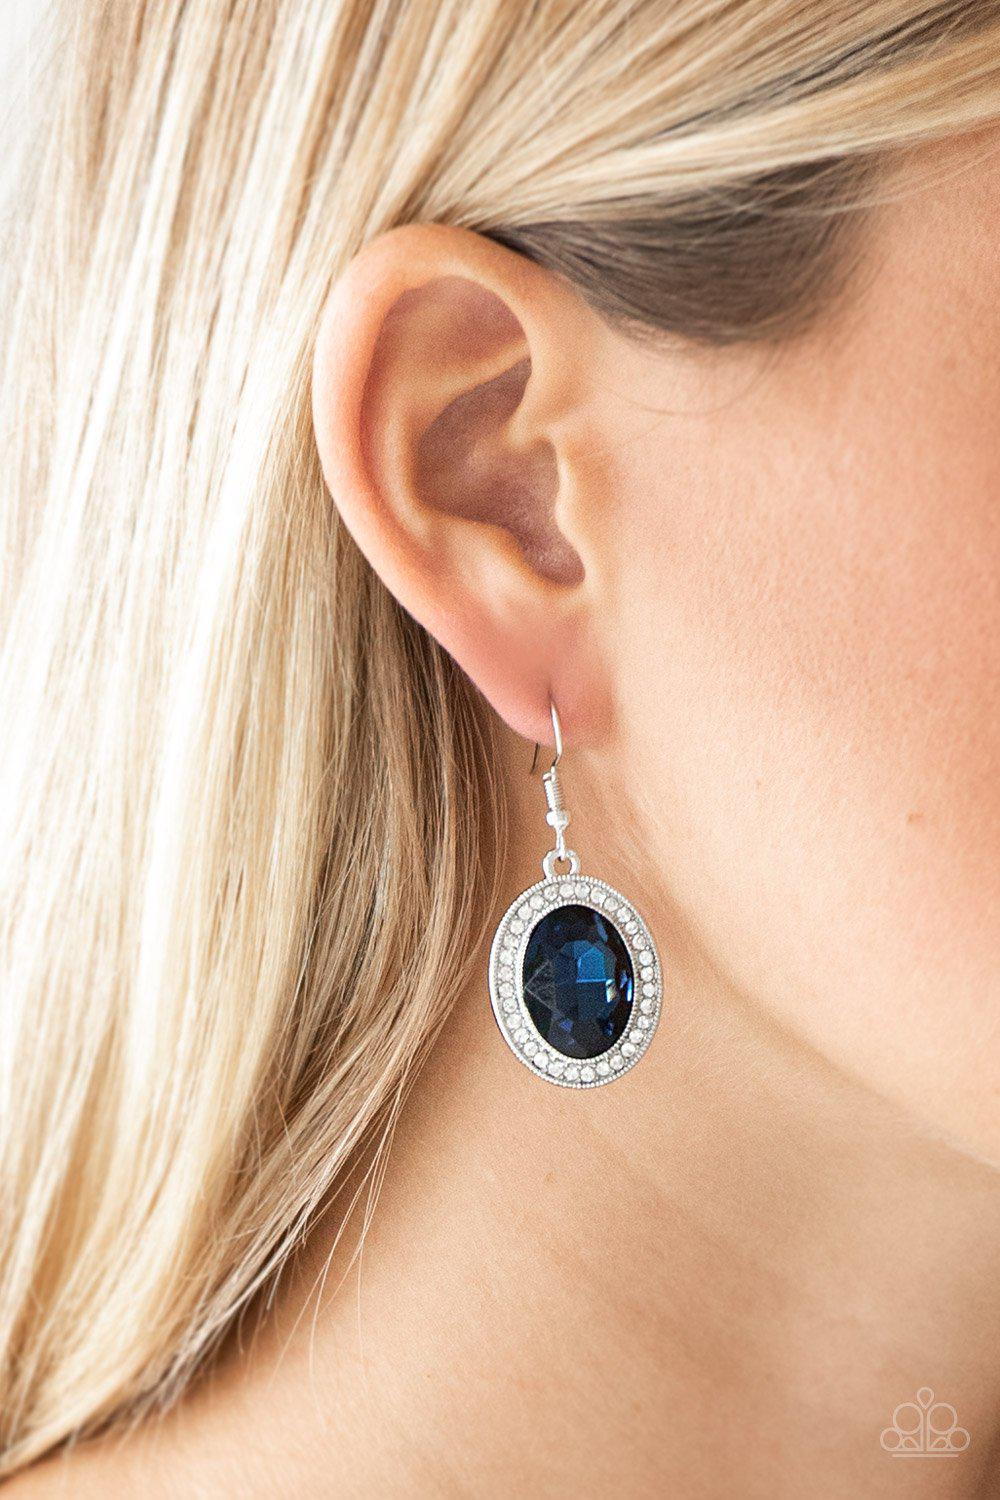 Only Fame In Town Sapphire Blue Gem Earrings - Paparazzi Accessories-CarasShop.com - $5 Jewelry by Cara Jewels